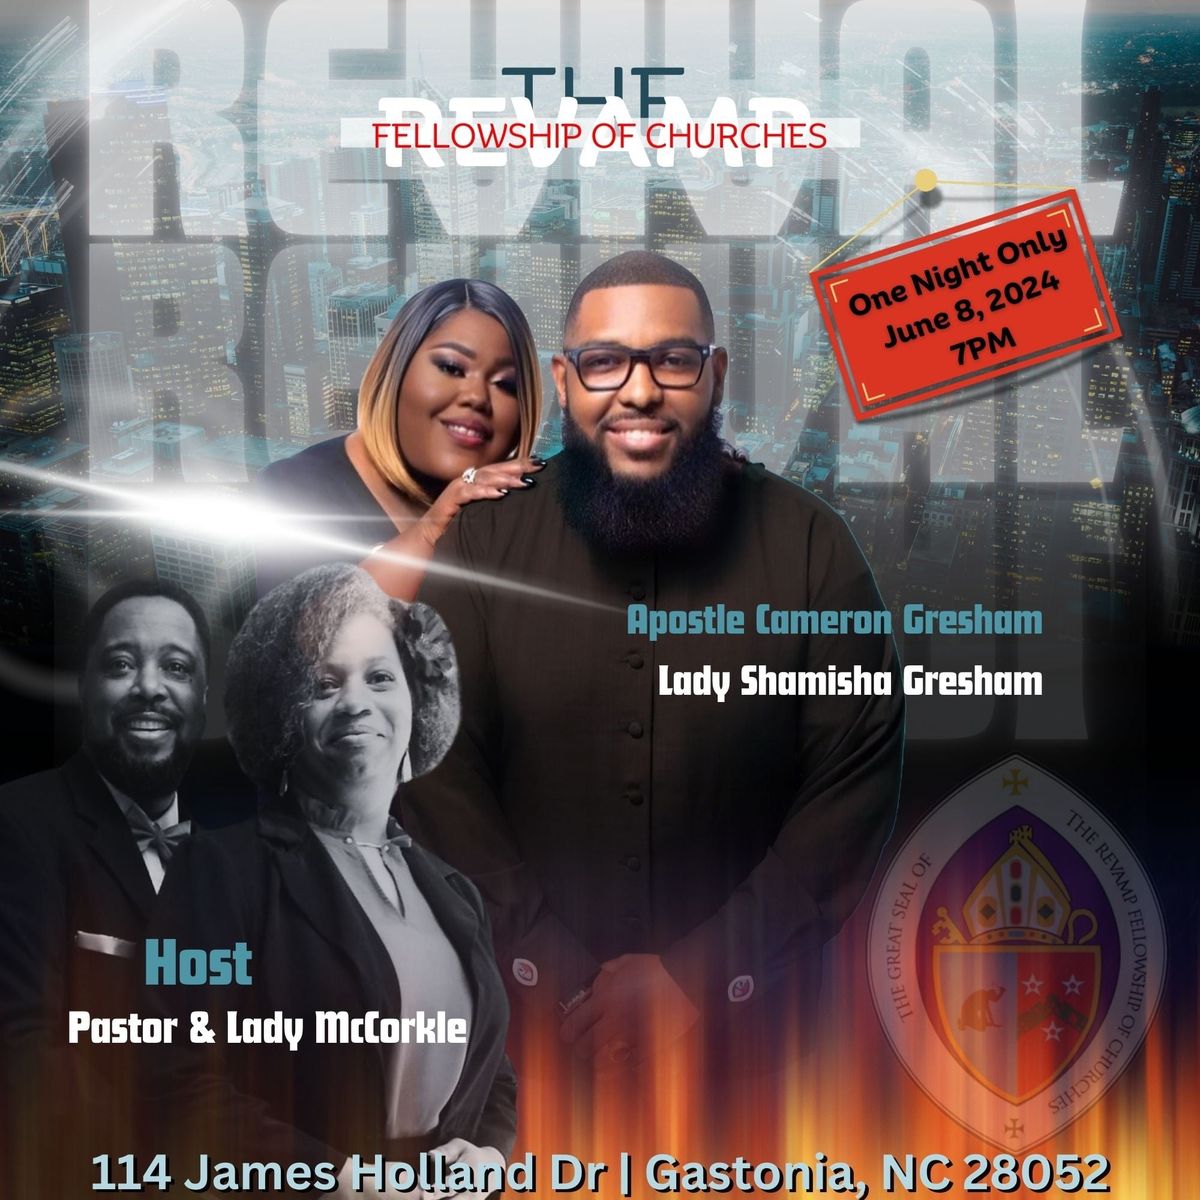 One Night Only! Revamp Fellowship of Churches